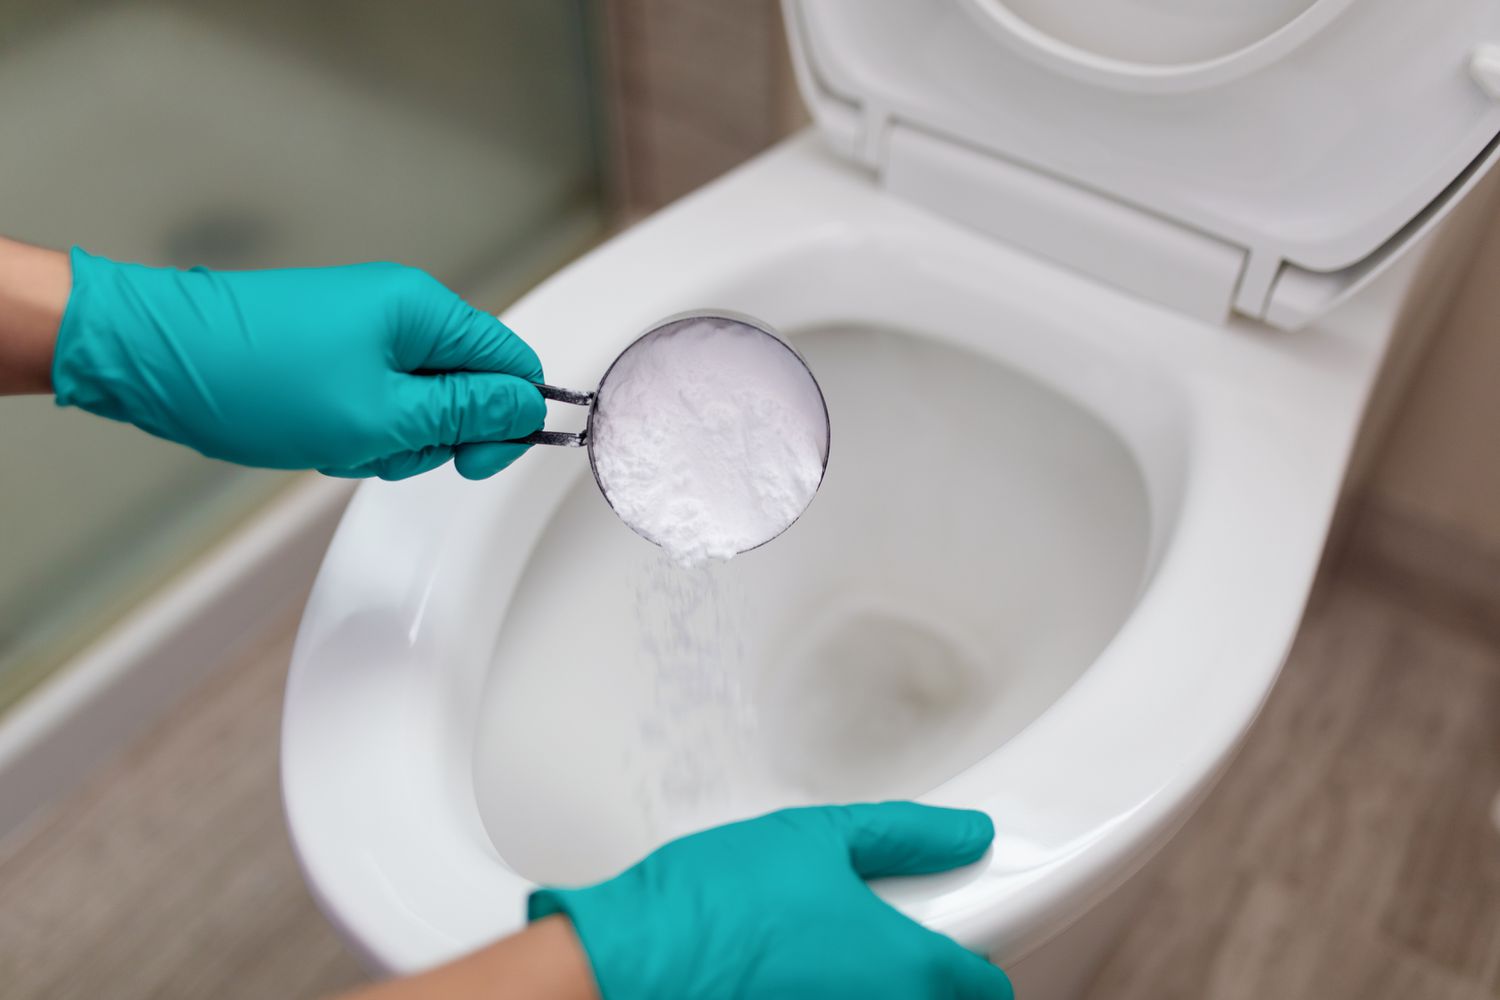 How To Clean Hard Water Stains From Toilet